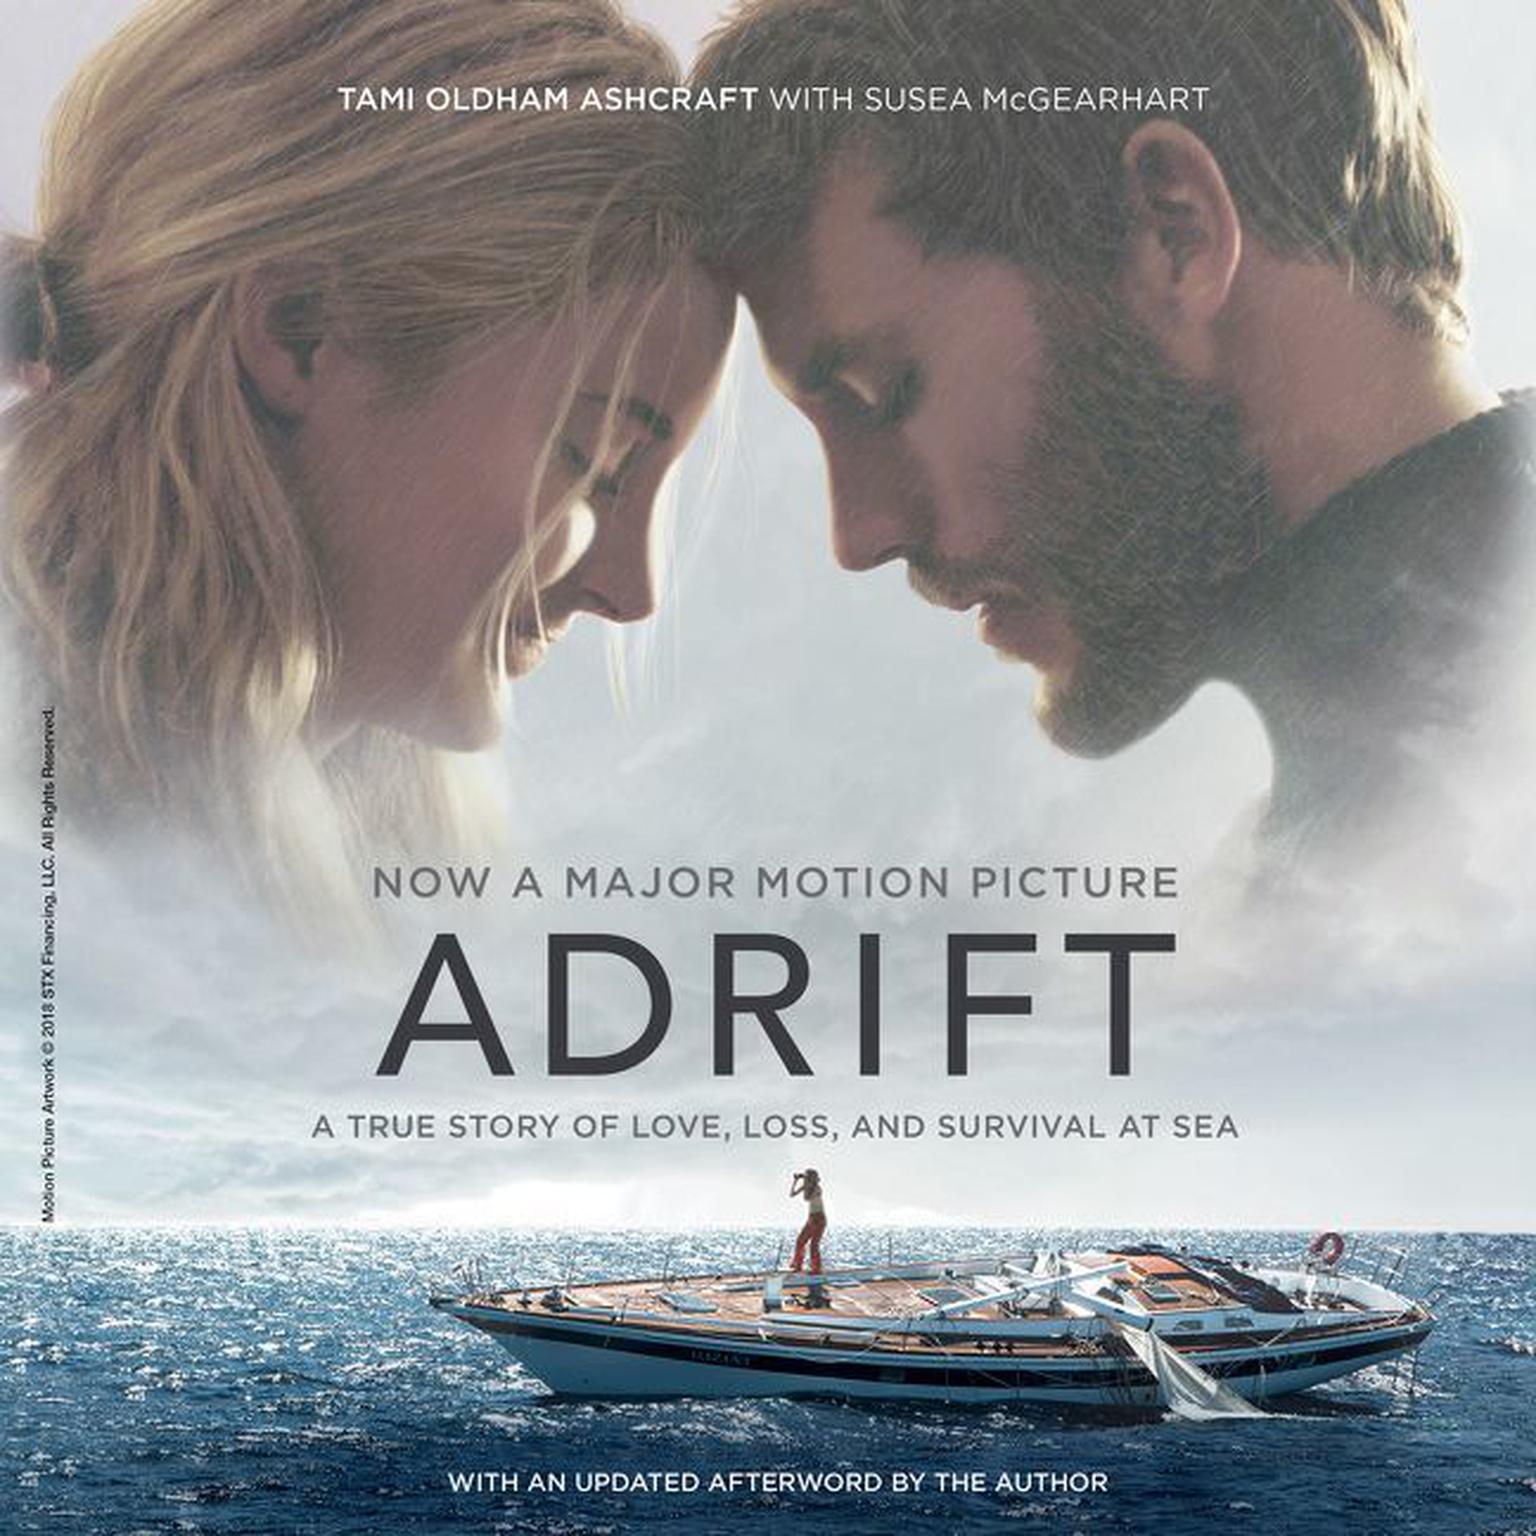 Adrift [Movie tie-in]: A True Story of Love, Loss, and Survival at Sea Audiobook, by Tami Oldham Ashcraft